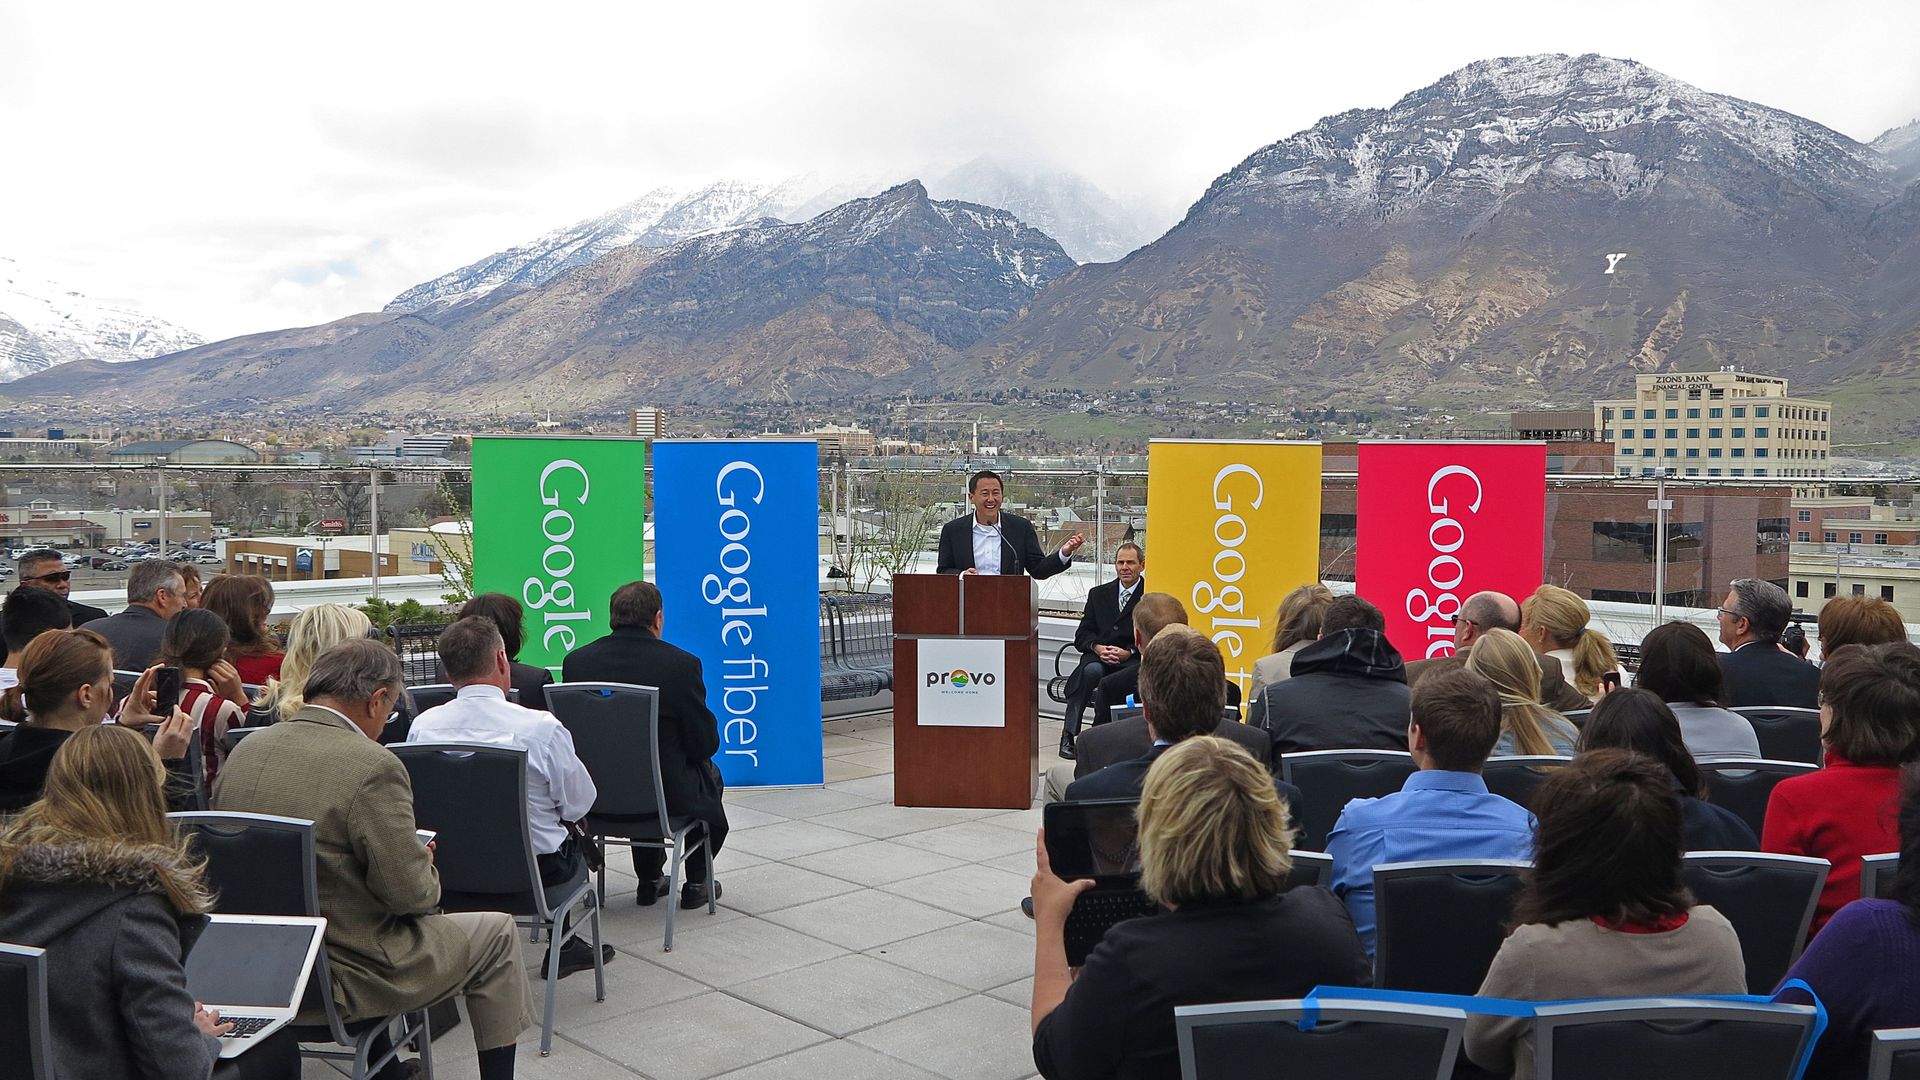 A man speaks in front of banners that say "Google" on a rooftop overlooking Provo, Utah with mountains in the background.